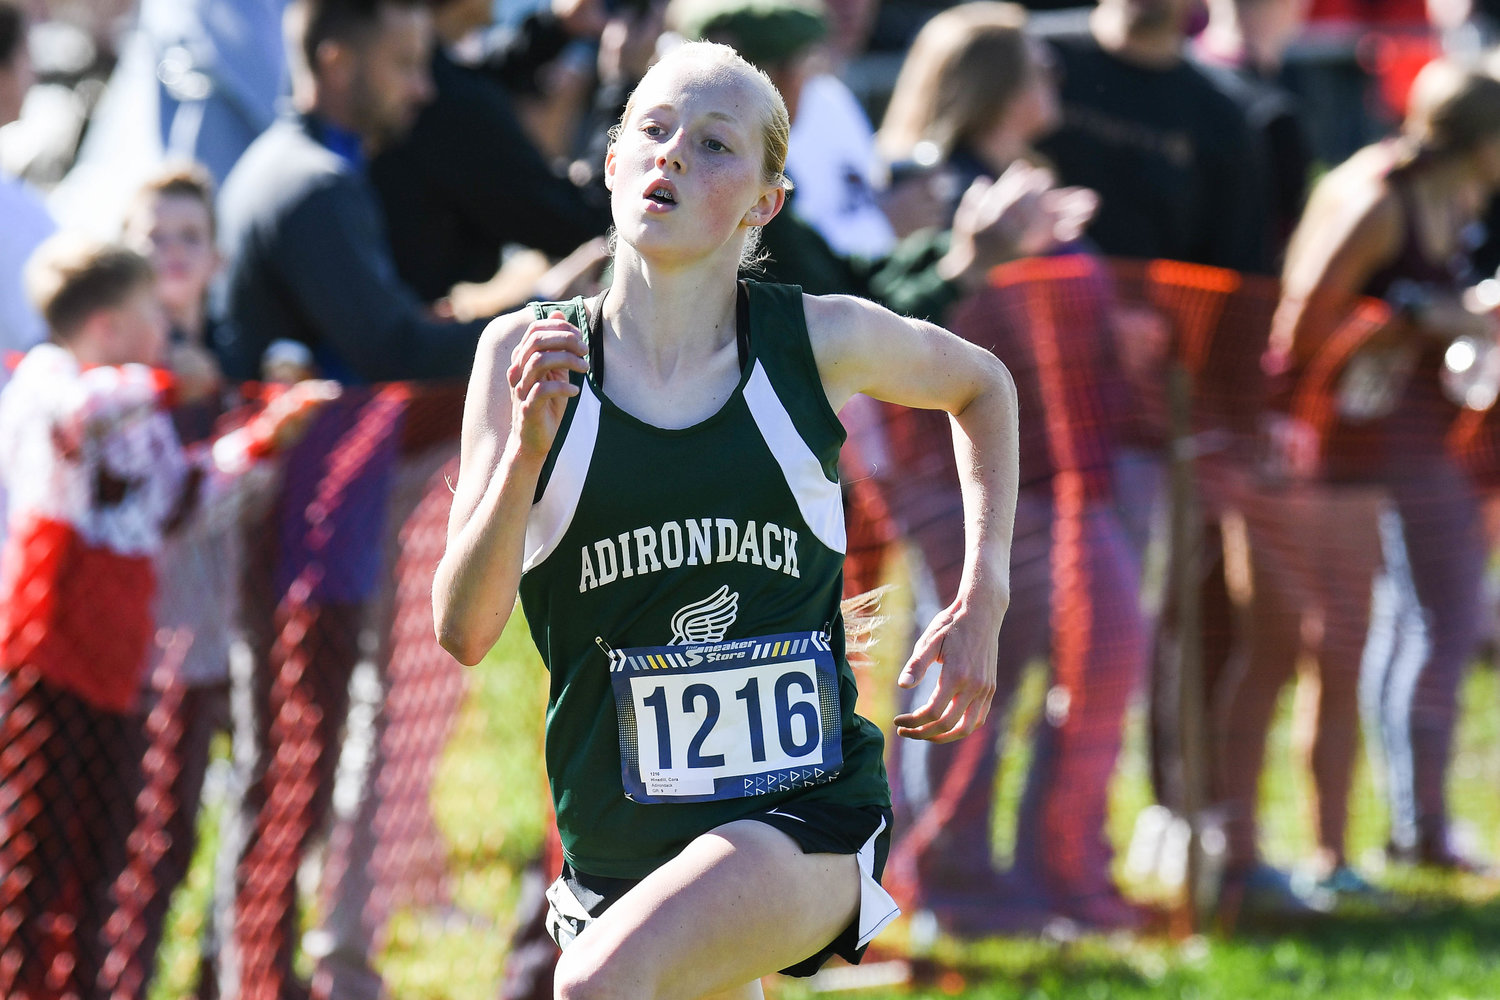 Cora Hinsdill of Adirondack won the girls varsity race at the 79th annual E.J. Herrmann Invitational at Proctor Park in Utica Saturday in 19:58.3 minutes. Her top time helped the Wildcats to a second place finish out of 18 schools.